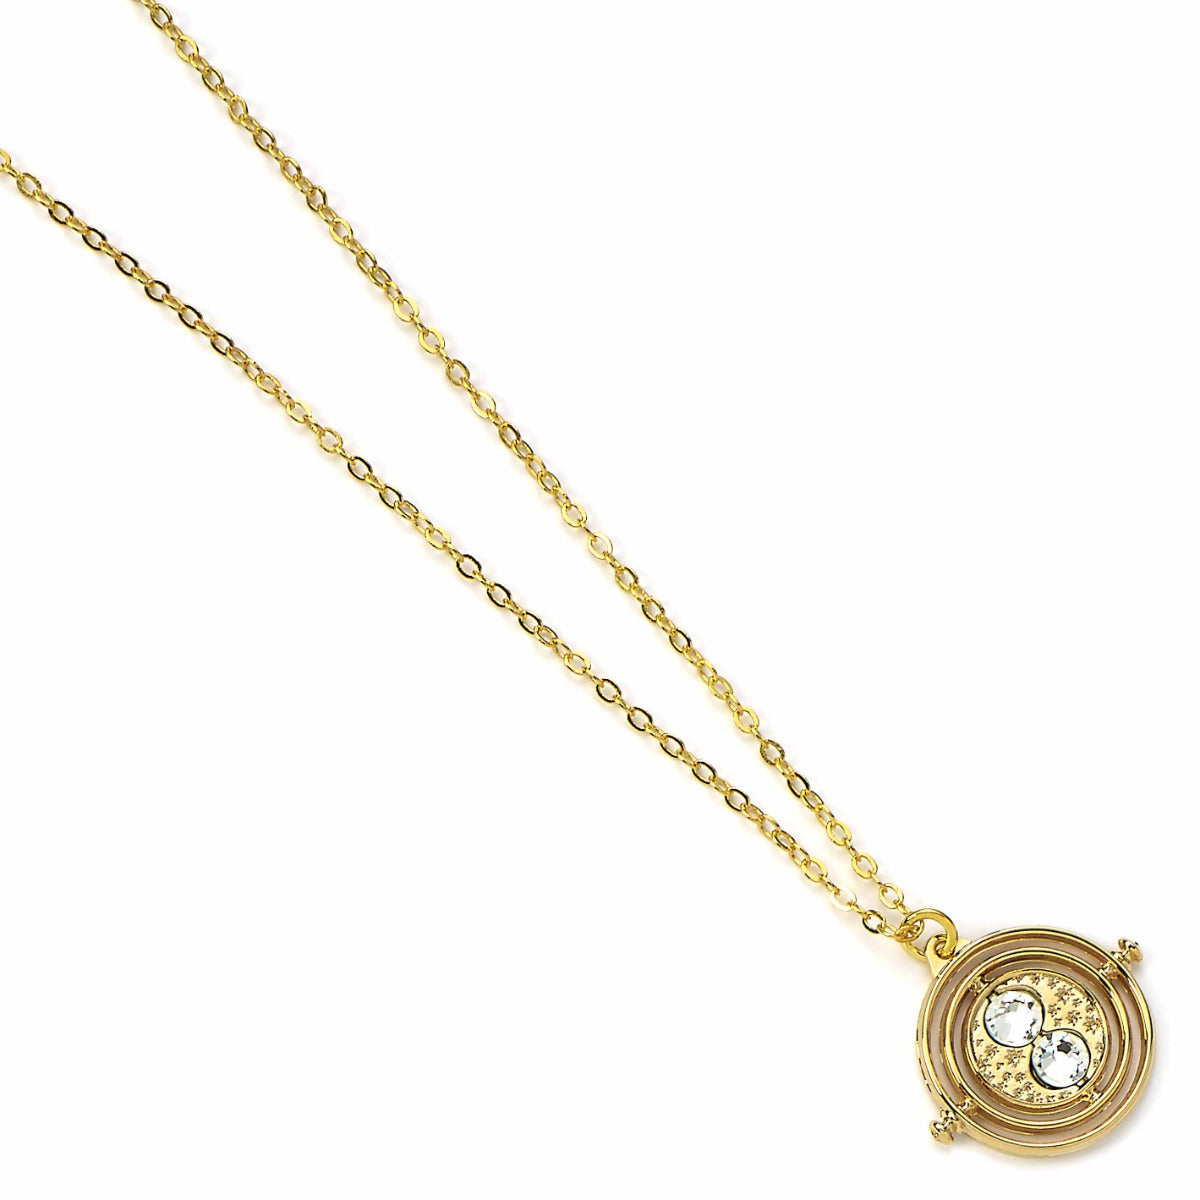 Harry Potter Official Fixed Time Turner Necklace